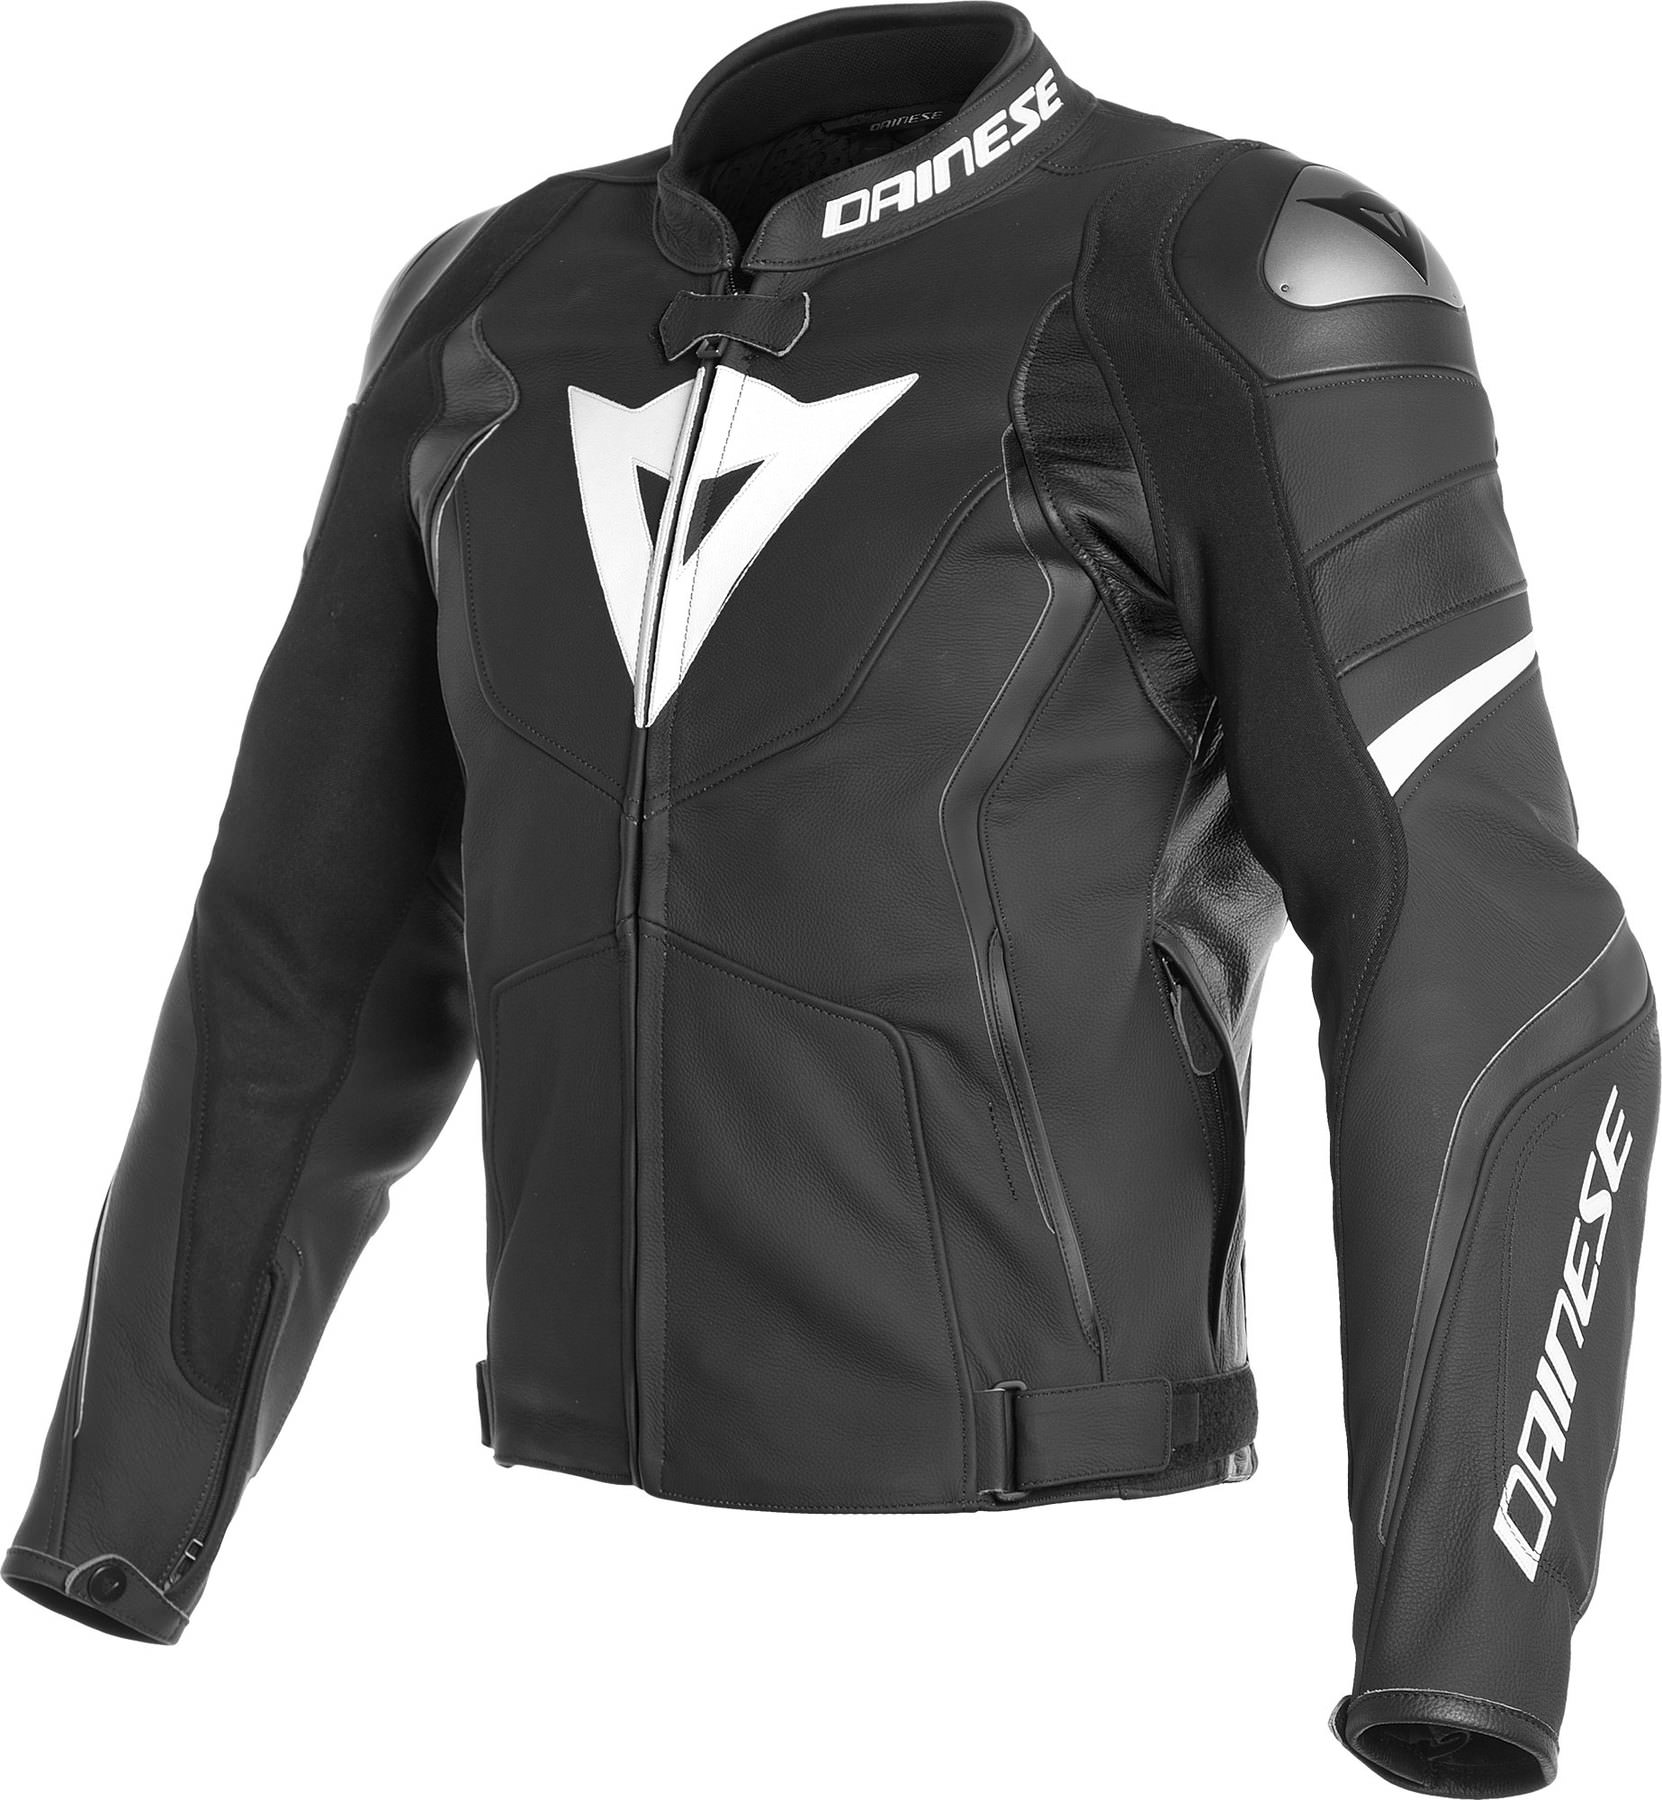 Buy Avro 4 Leather Jacket | Louis motorcycle clothing and technology